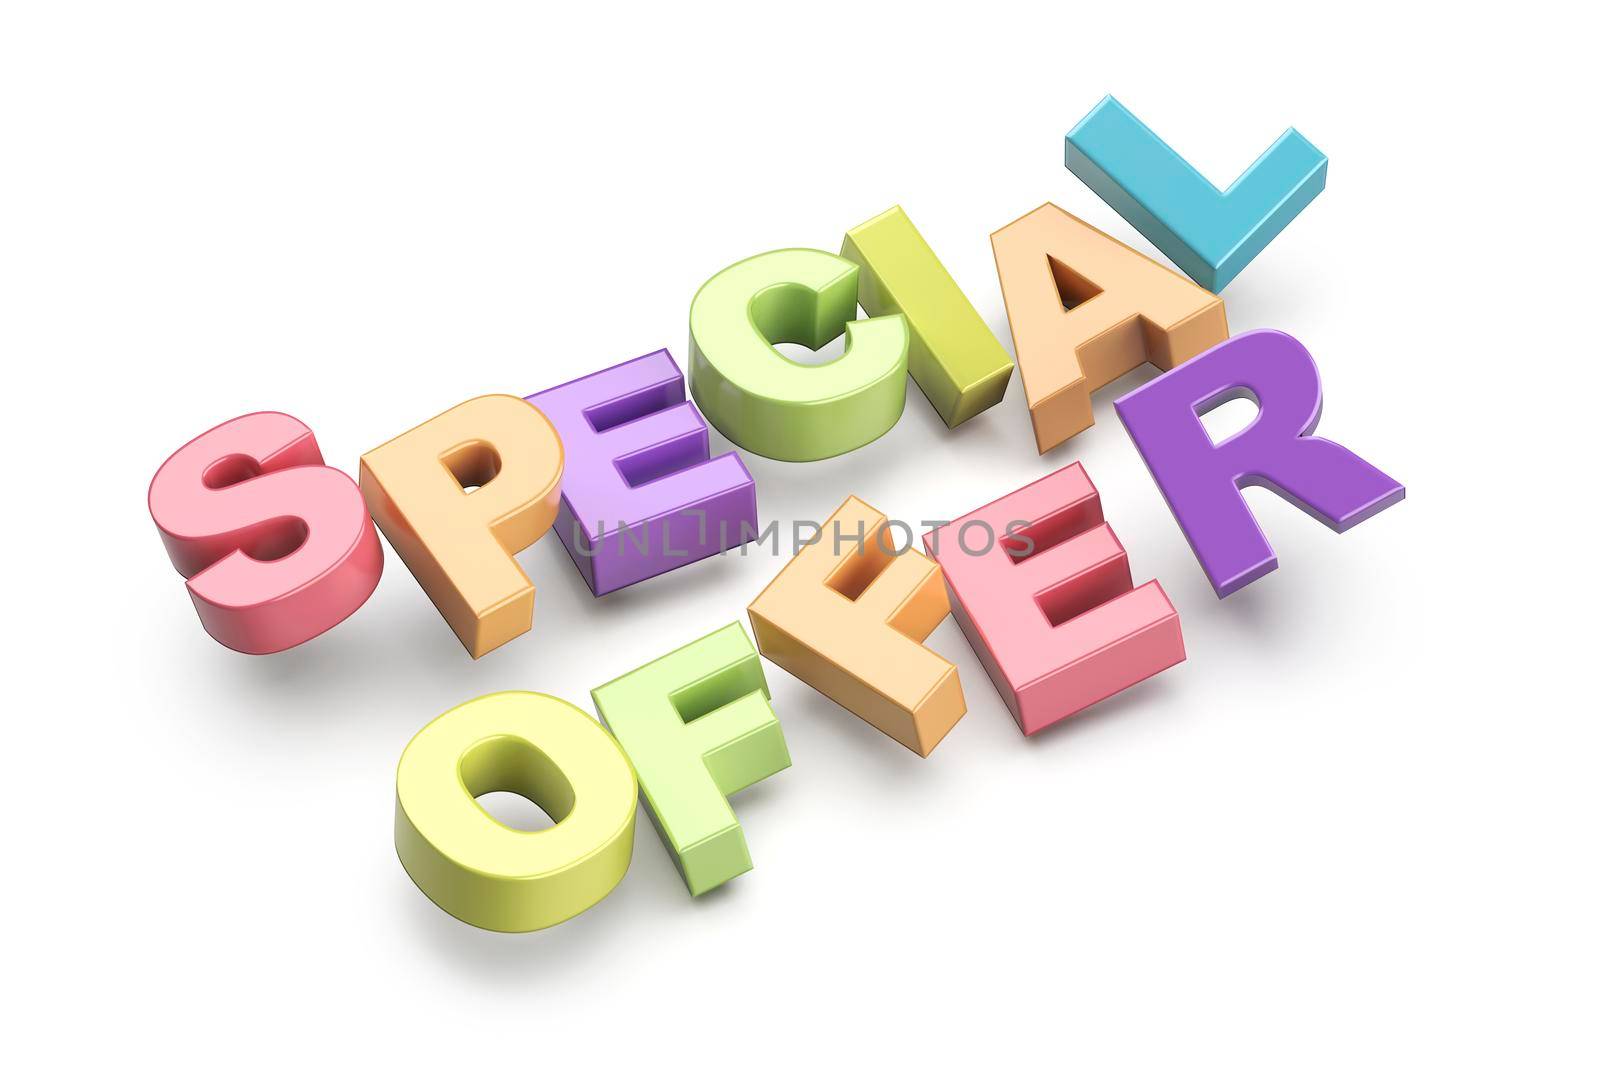 Special offer promo text by magraphics